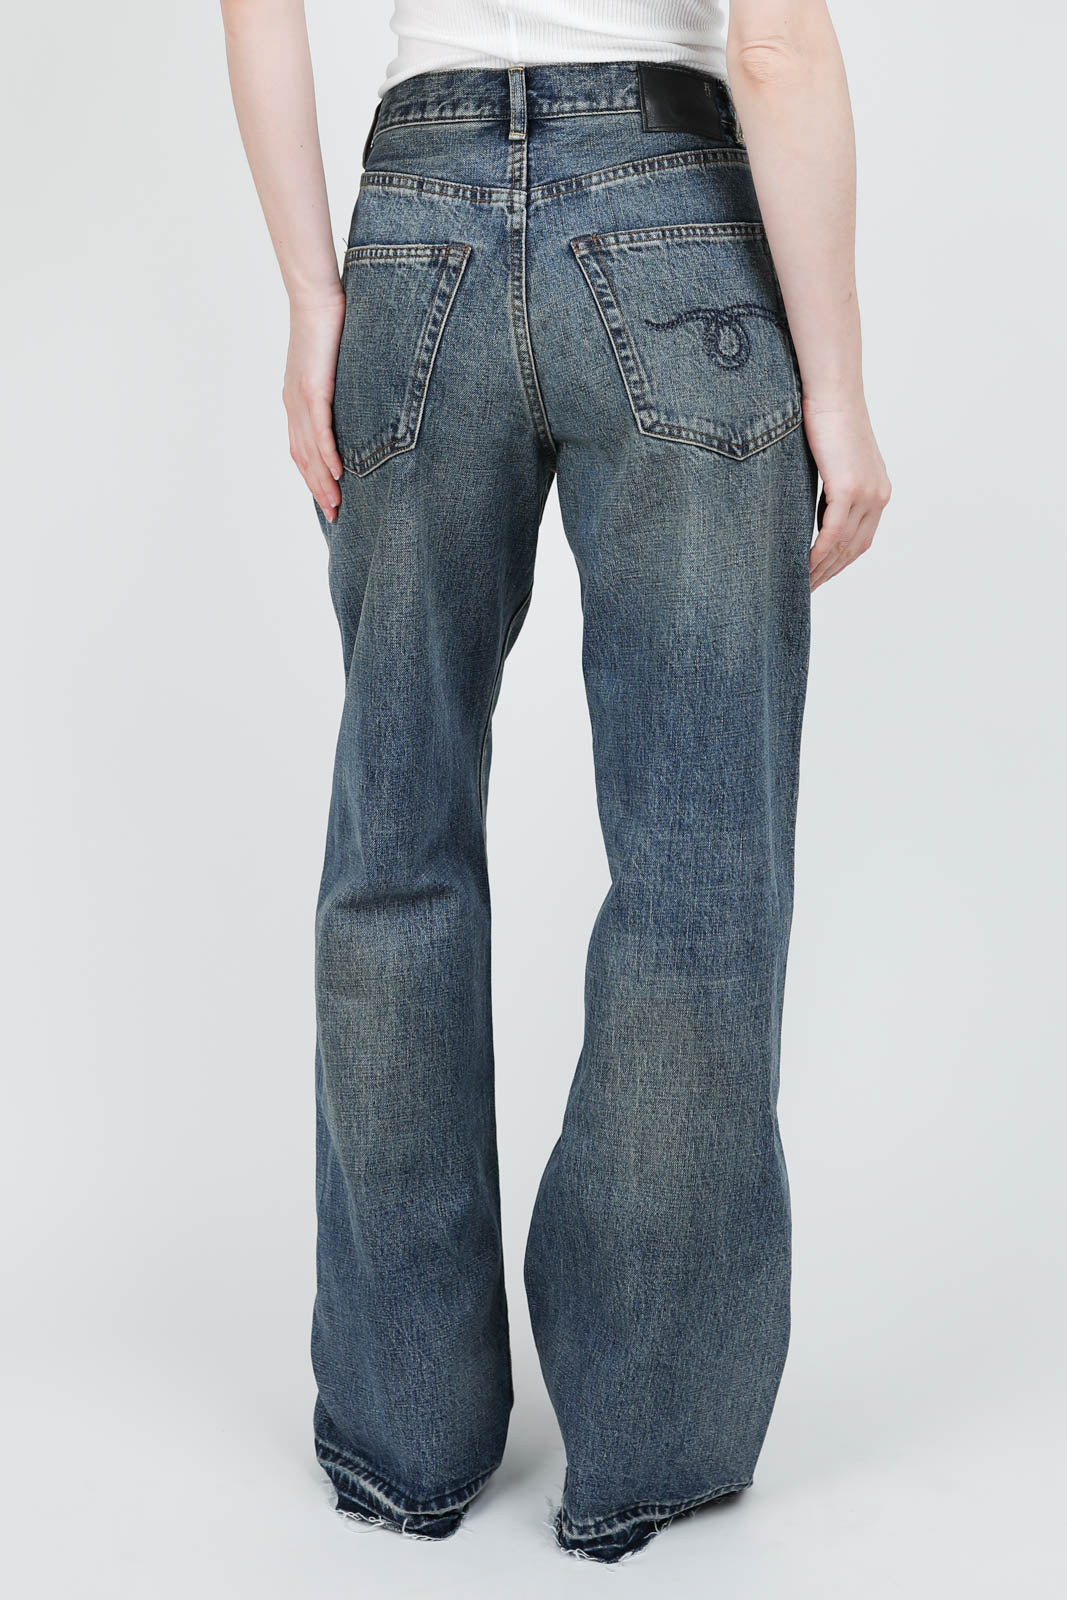 Jeans D'Arcy Loose in Barter Indigo